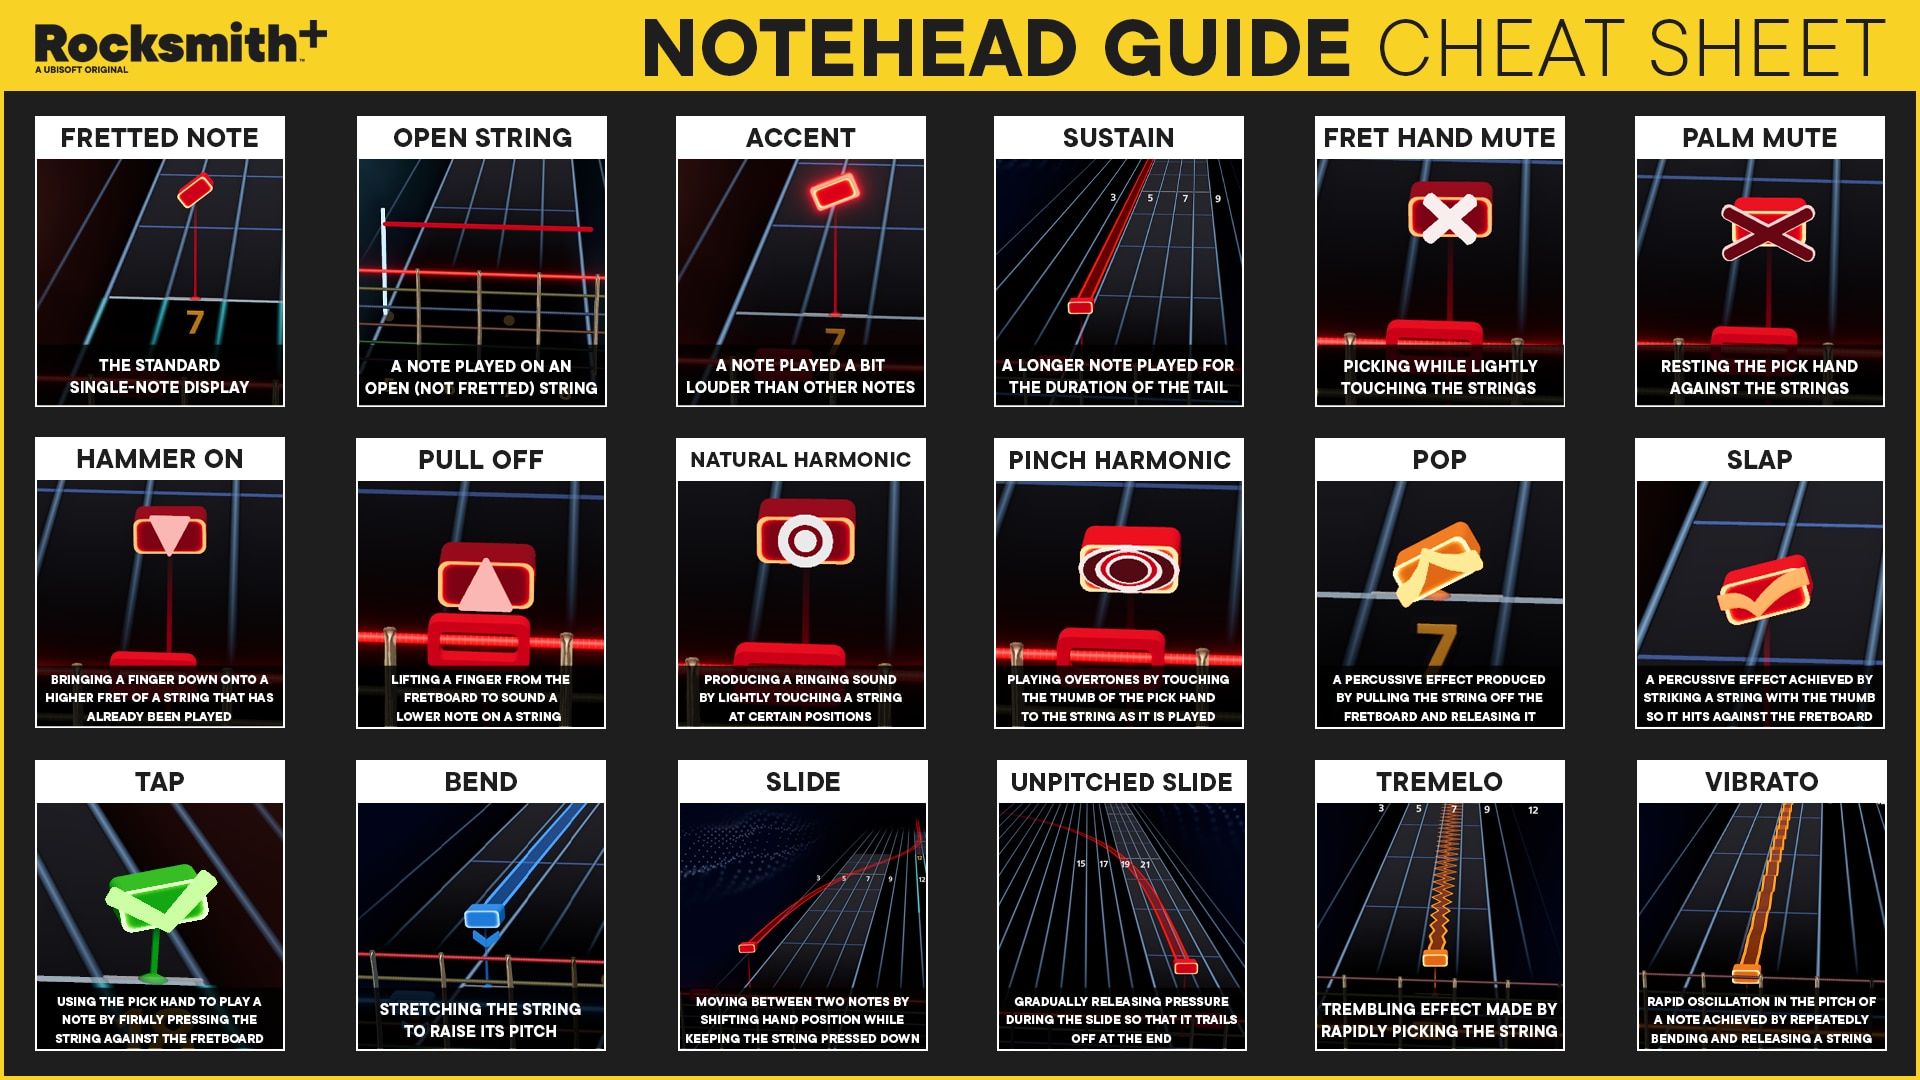 [RS+] News Article - Notehead Guide - 16X9 V2